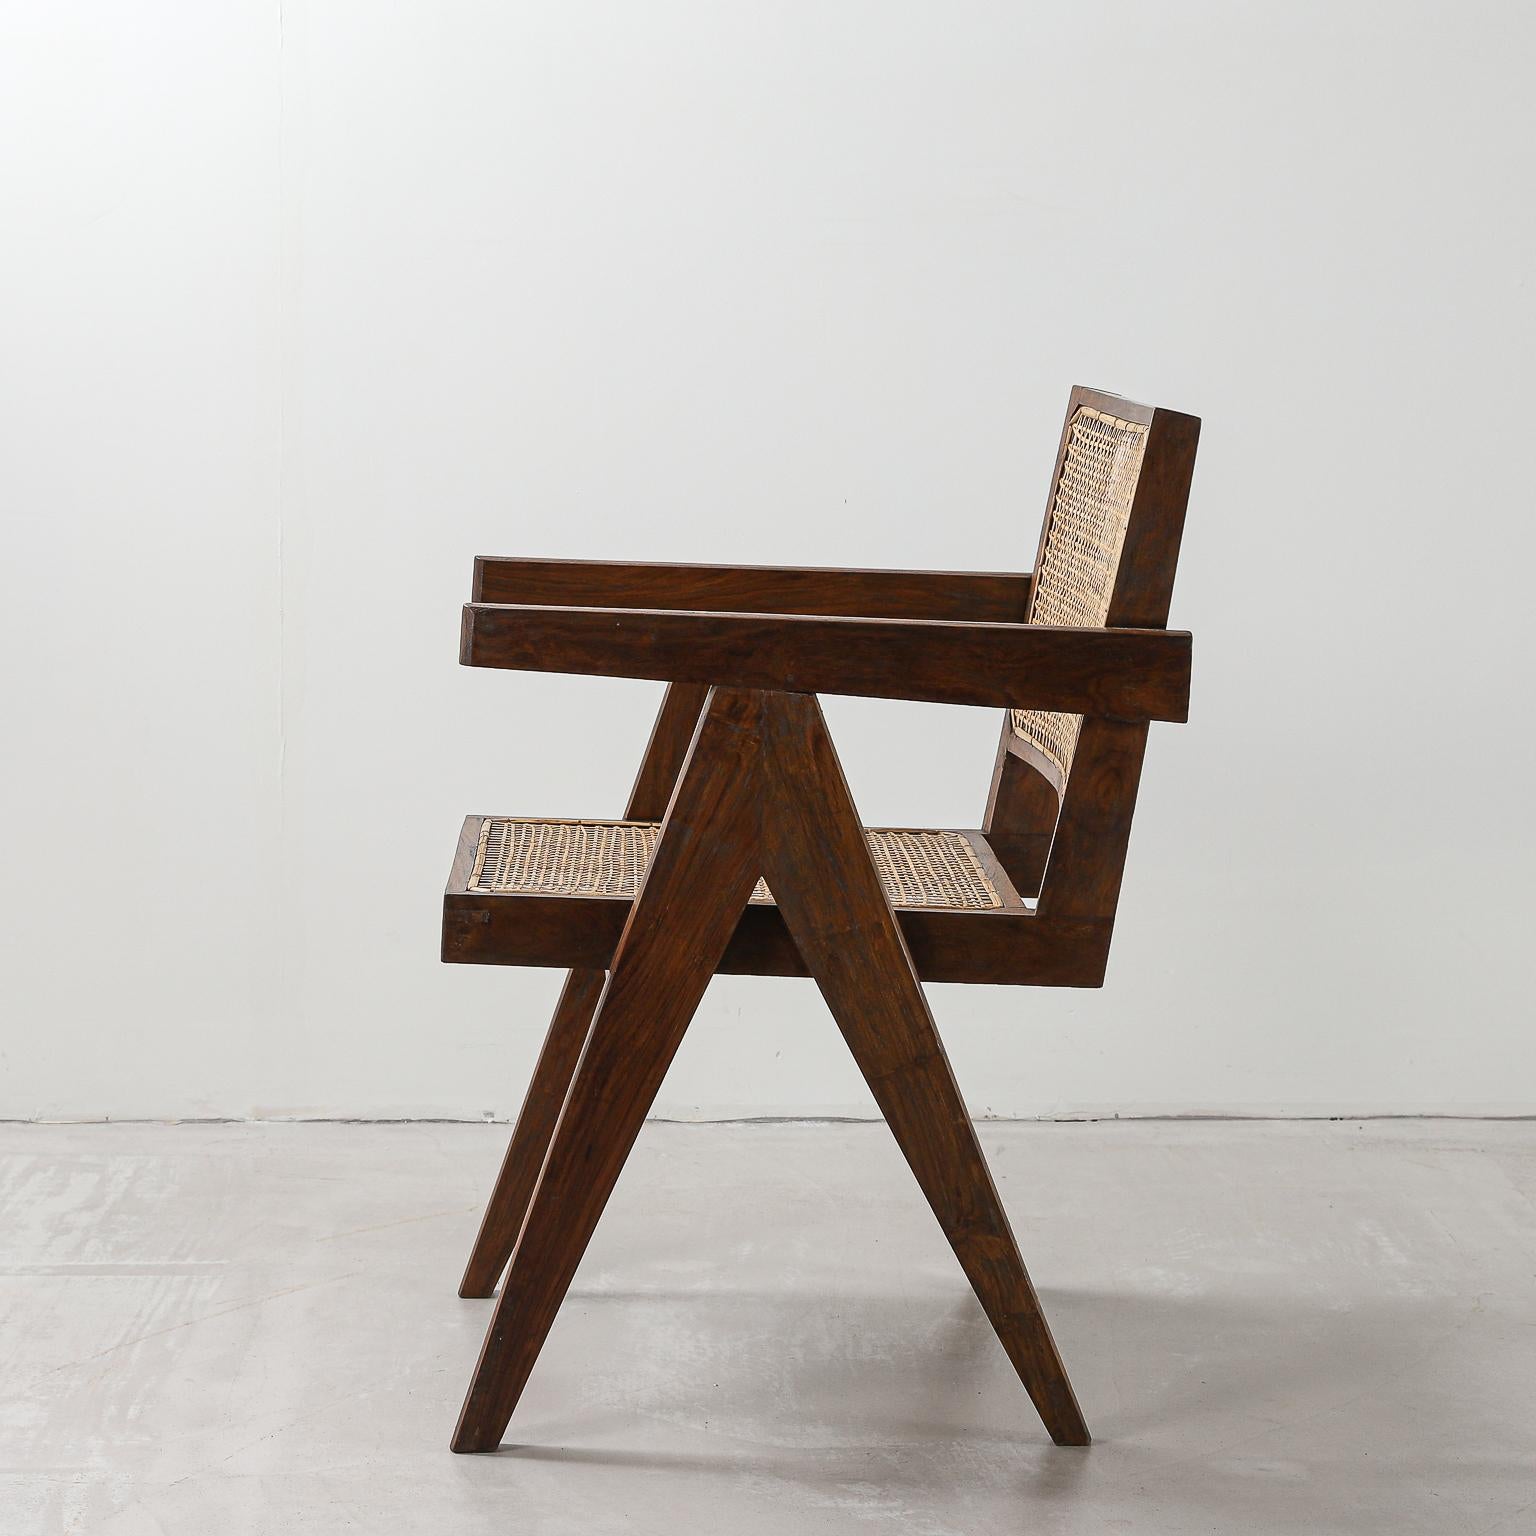 Mid-20th Century Pair of Pierre Jeanneret Office Chair, Variant, circa 1953-1954